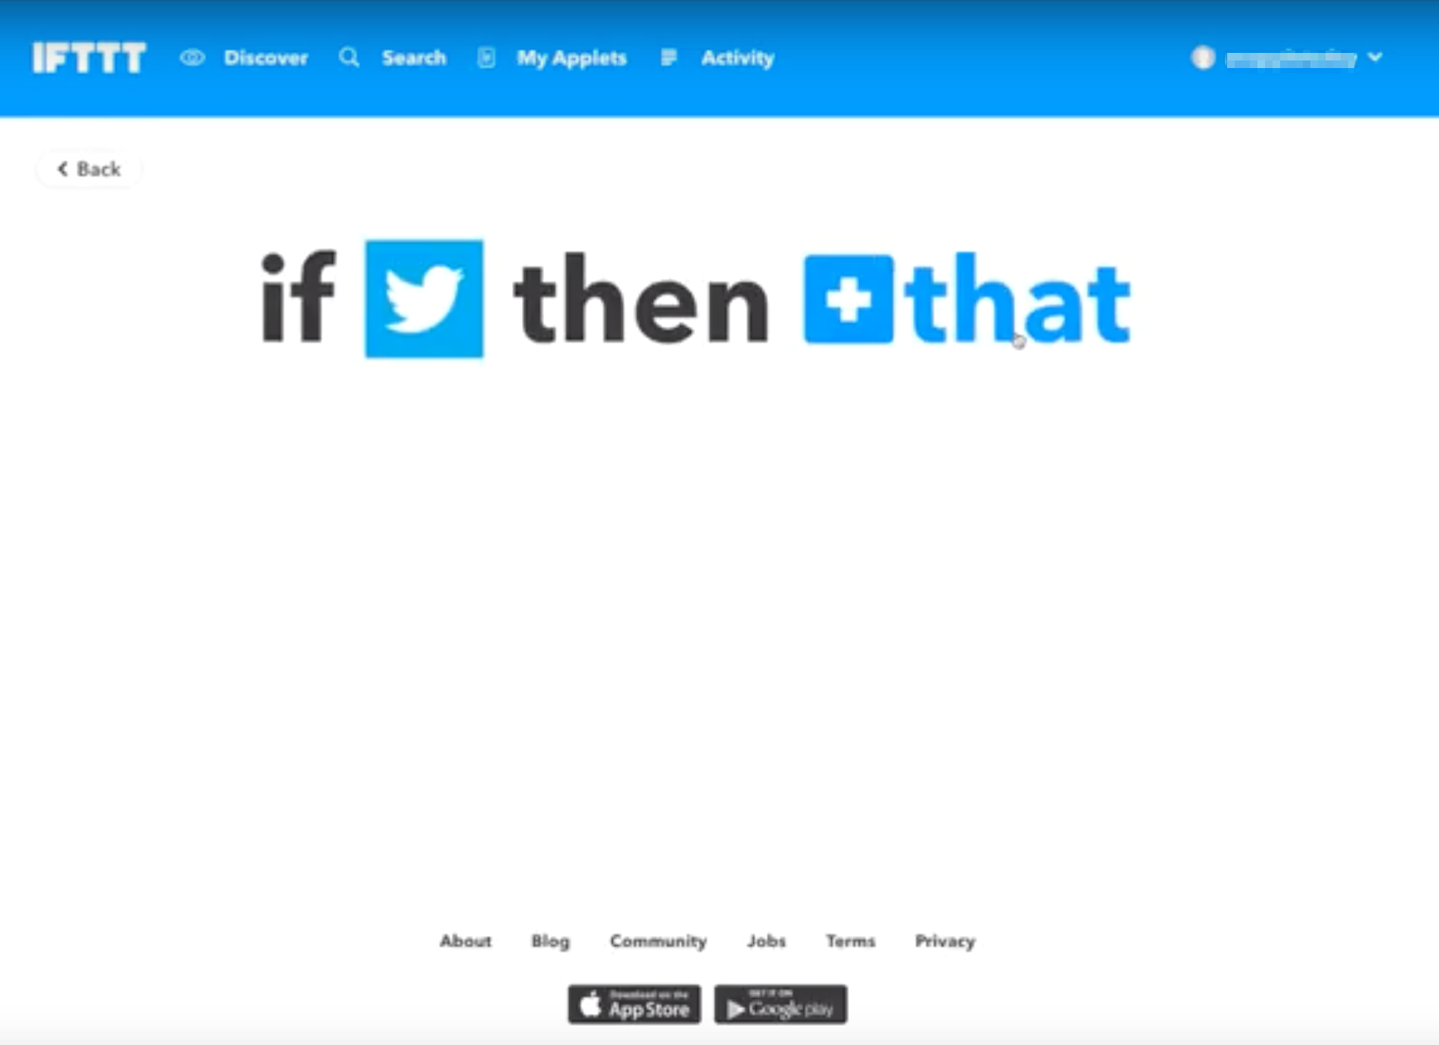 IFTTT (If This, Then That) applet creator